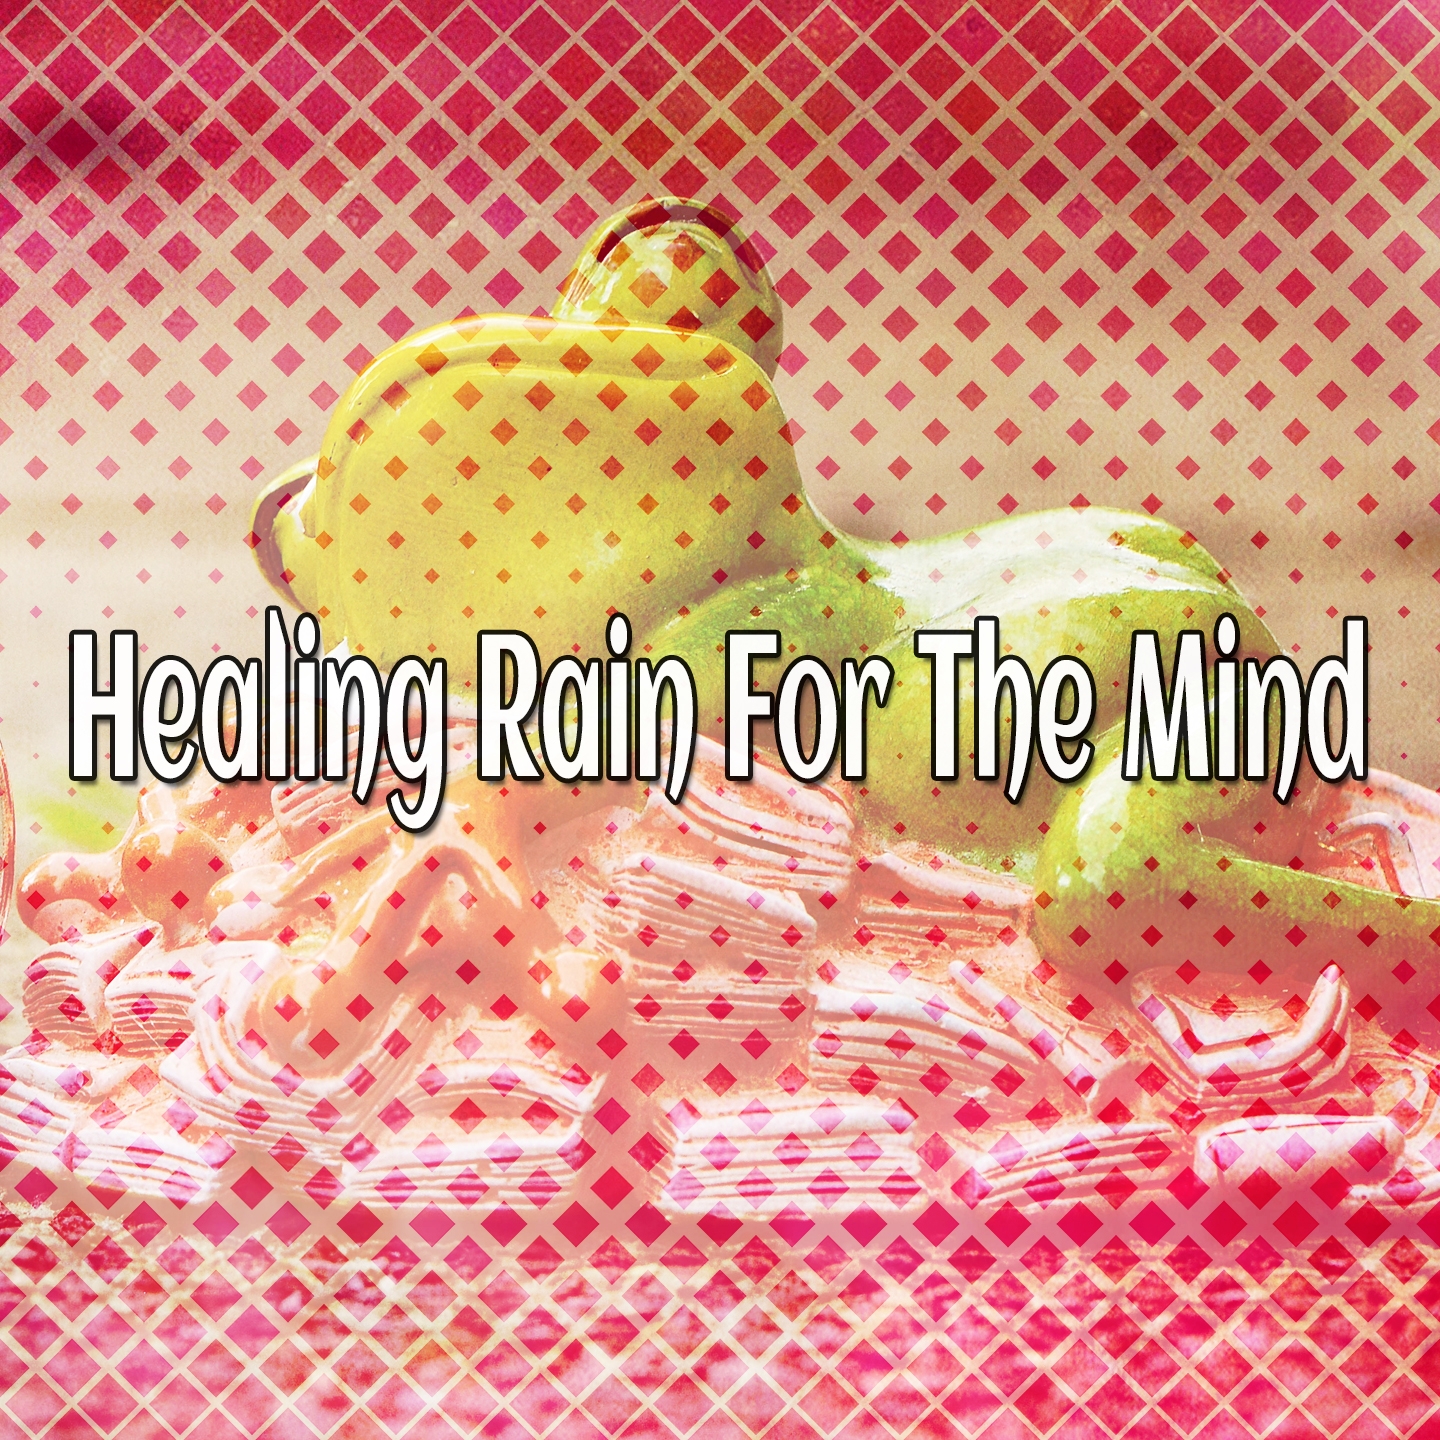 Healing Rain For The Mind